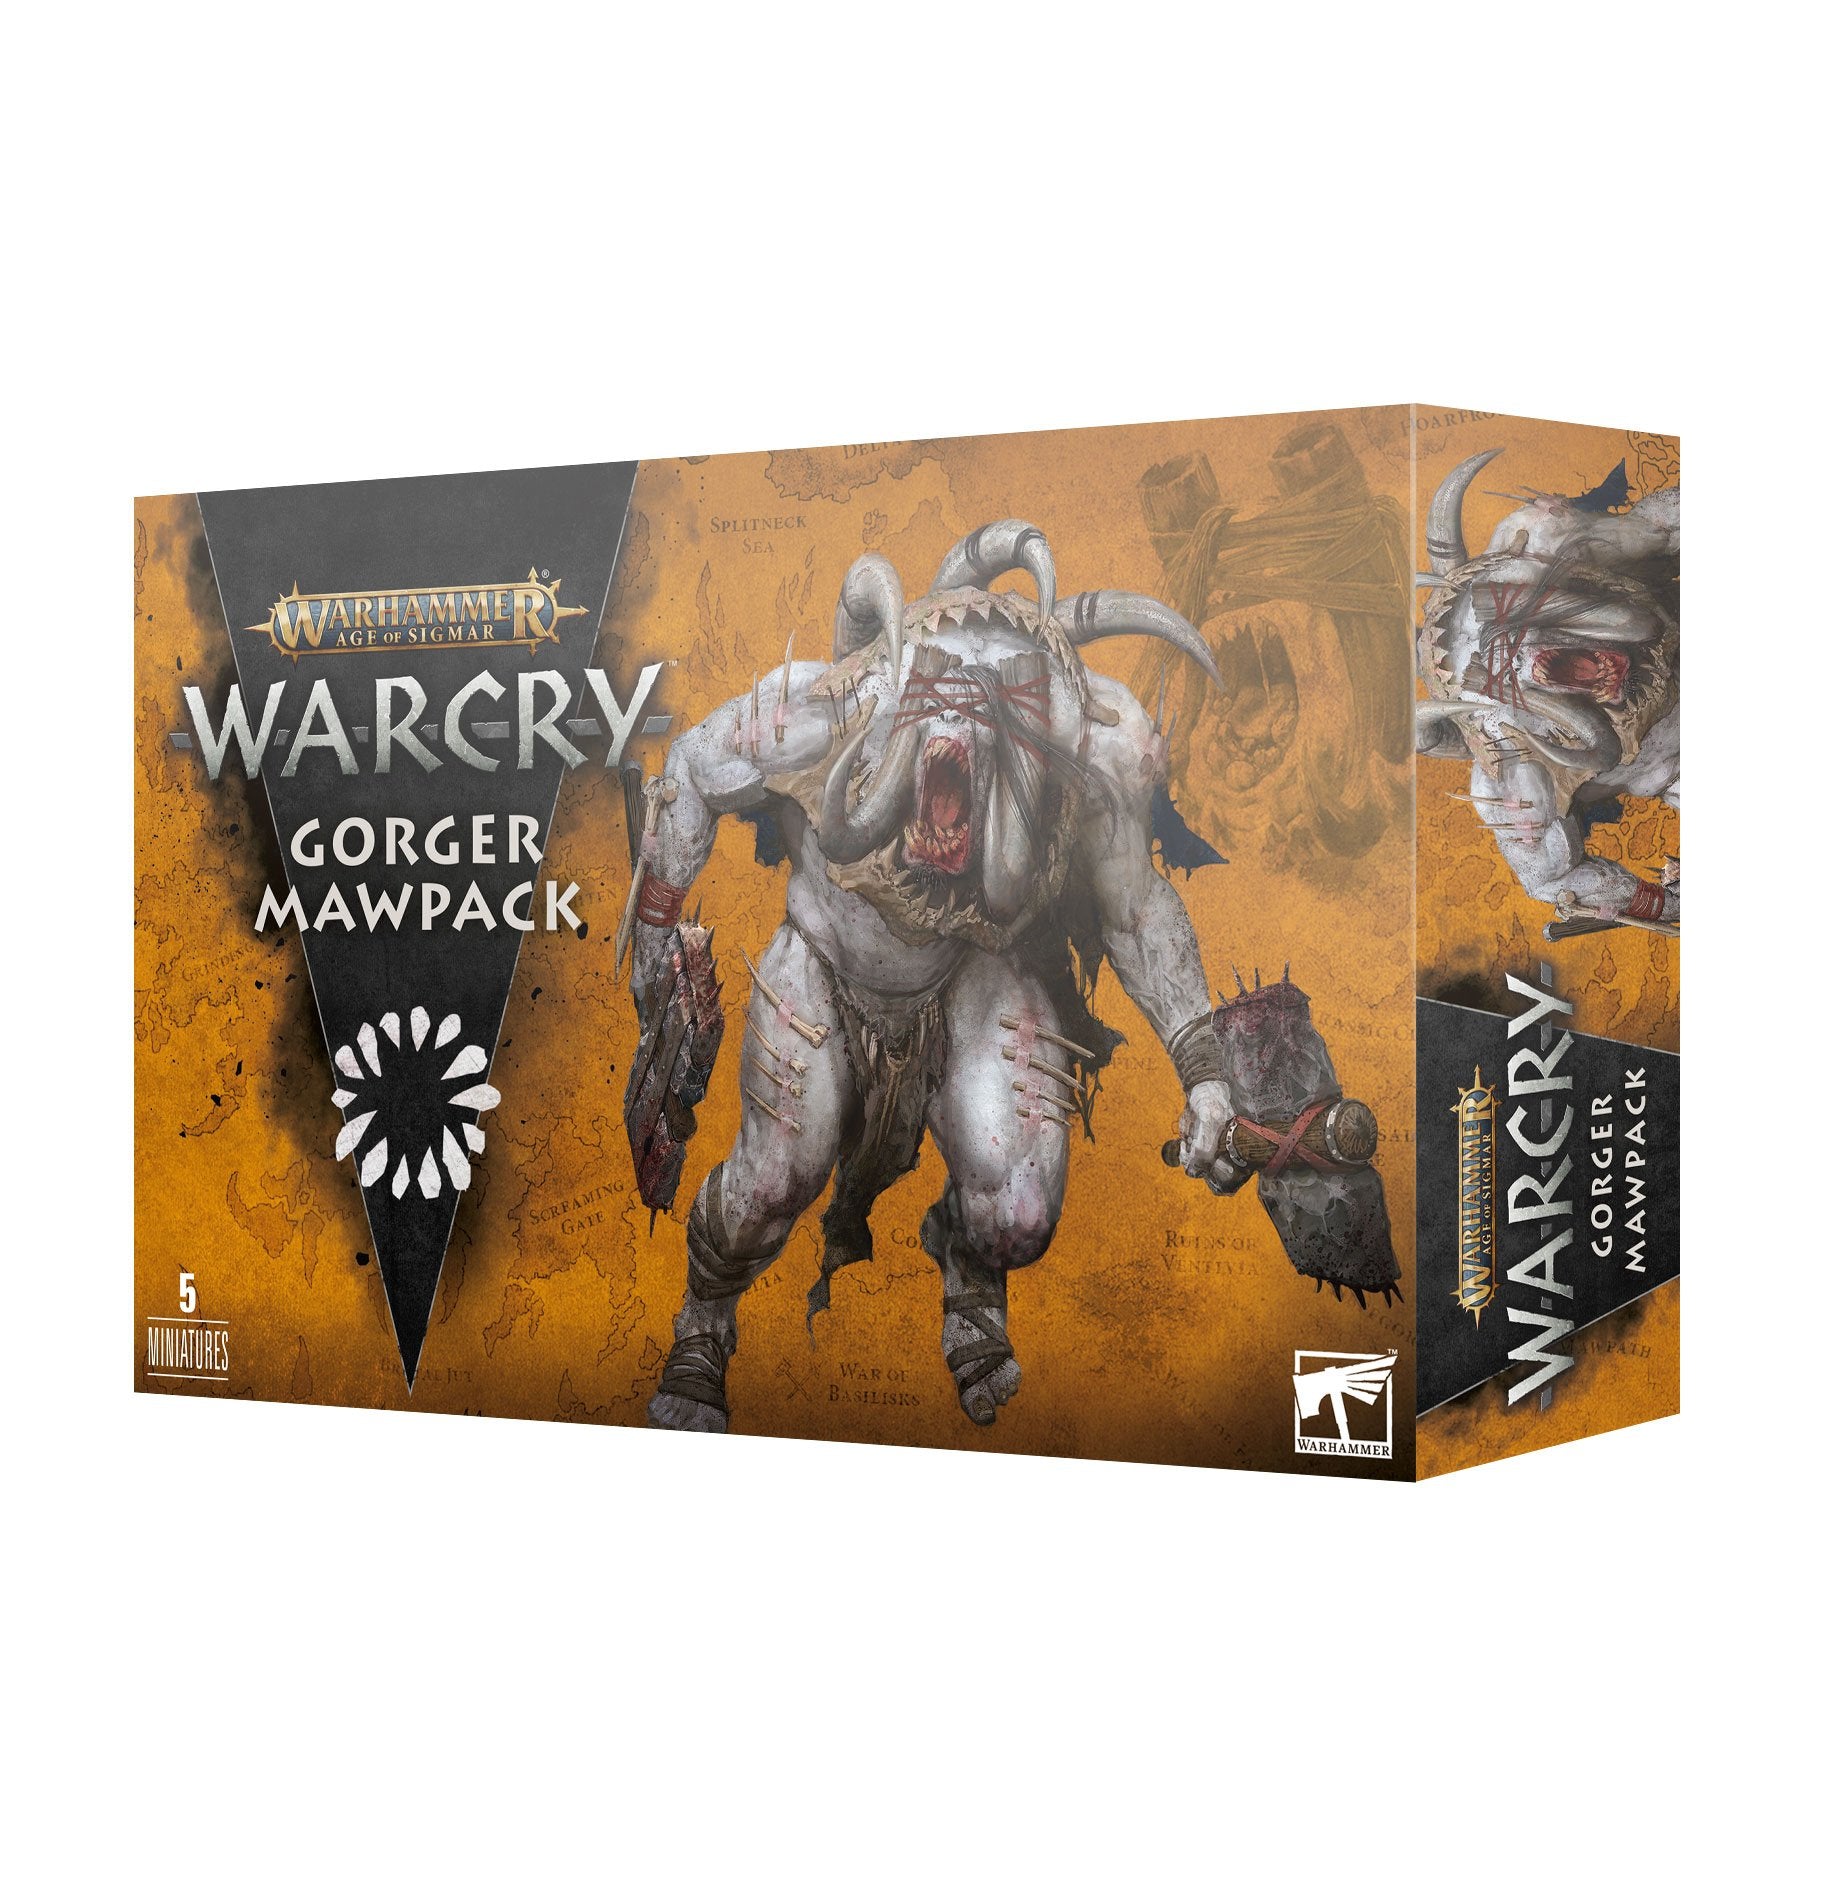 Warcry: Gorger Mawpack - Release Date 20/4/24 - Loaded Dice